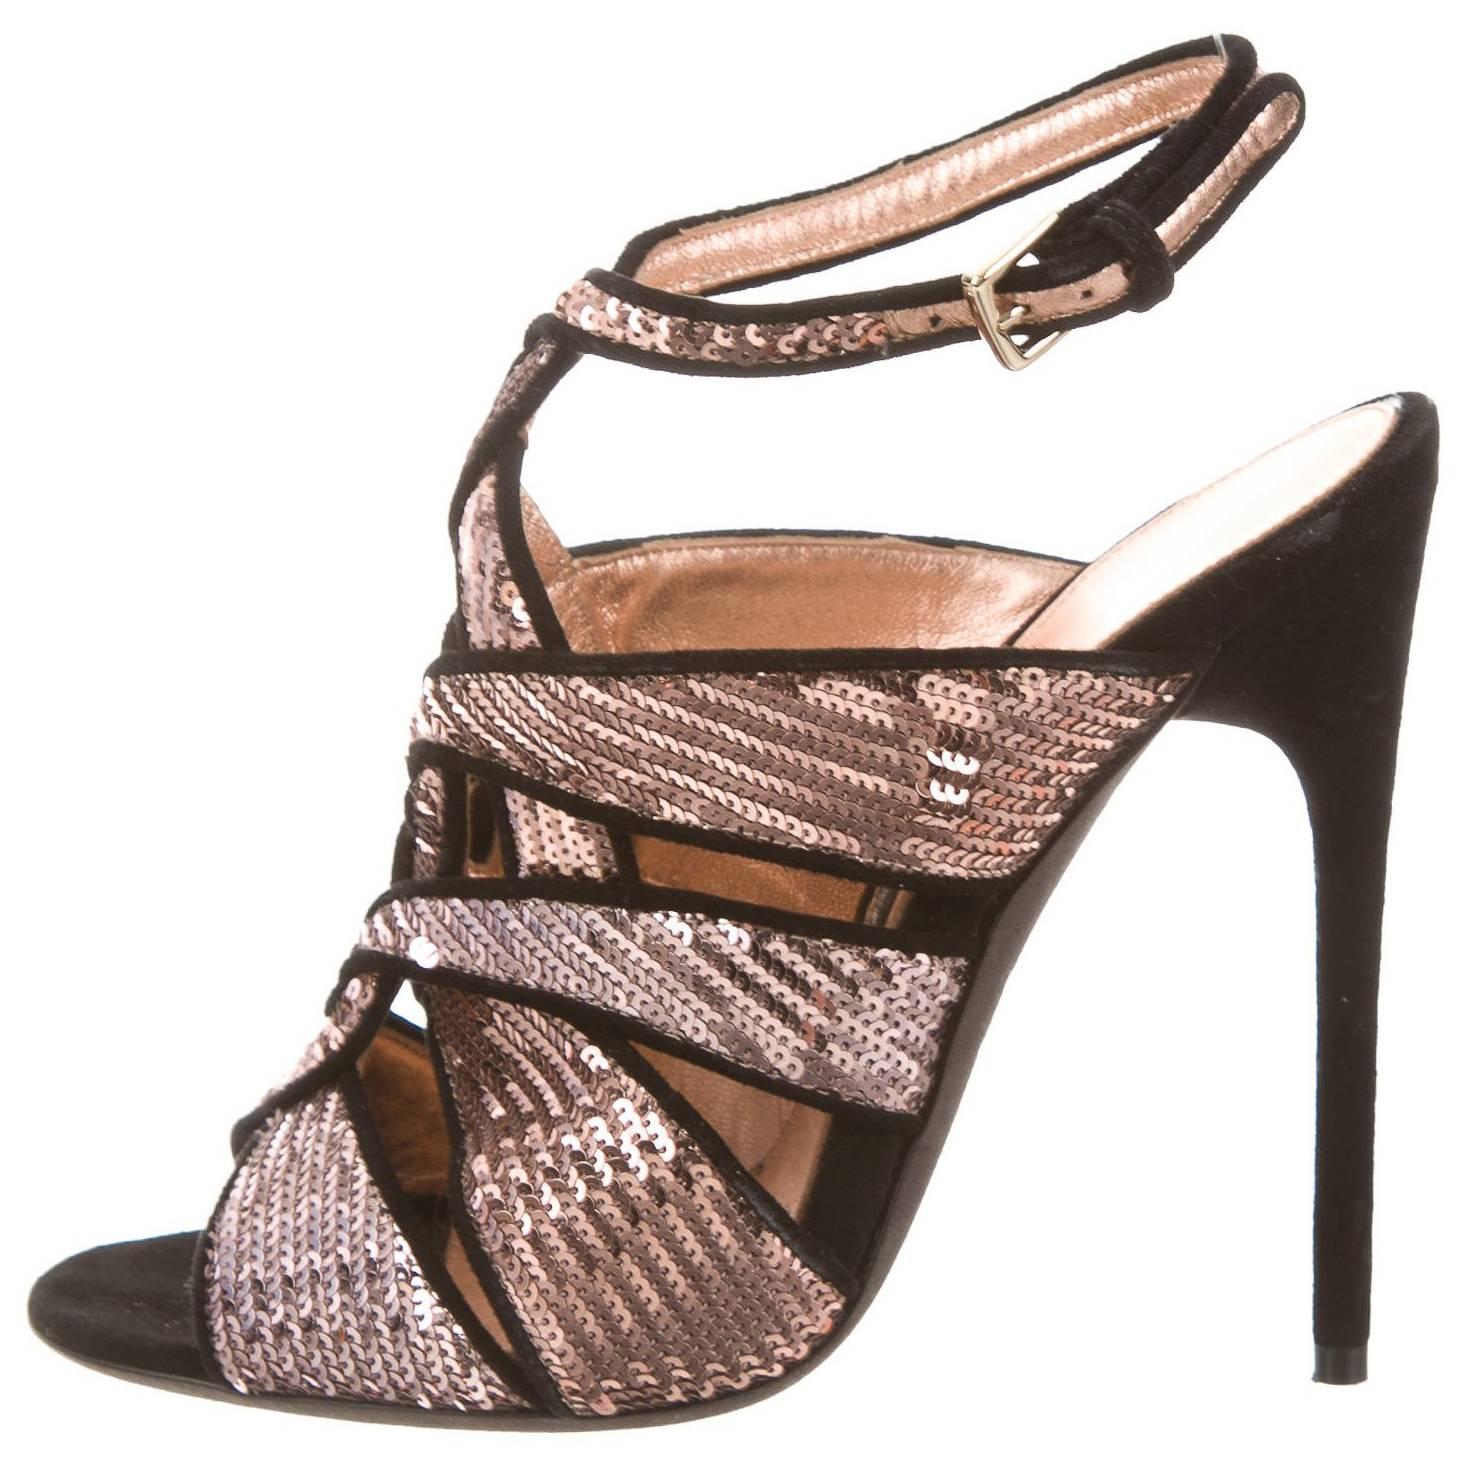 Tom Ford NEW & SOLD OUT Sequin Suede Cut Out Sandals Evening Heels 